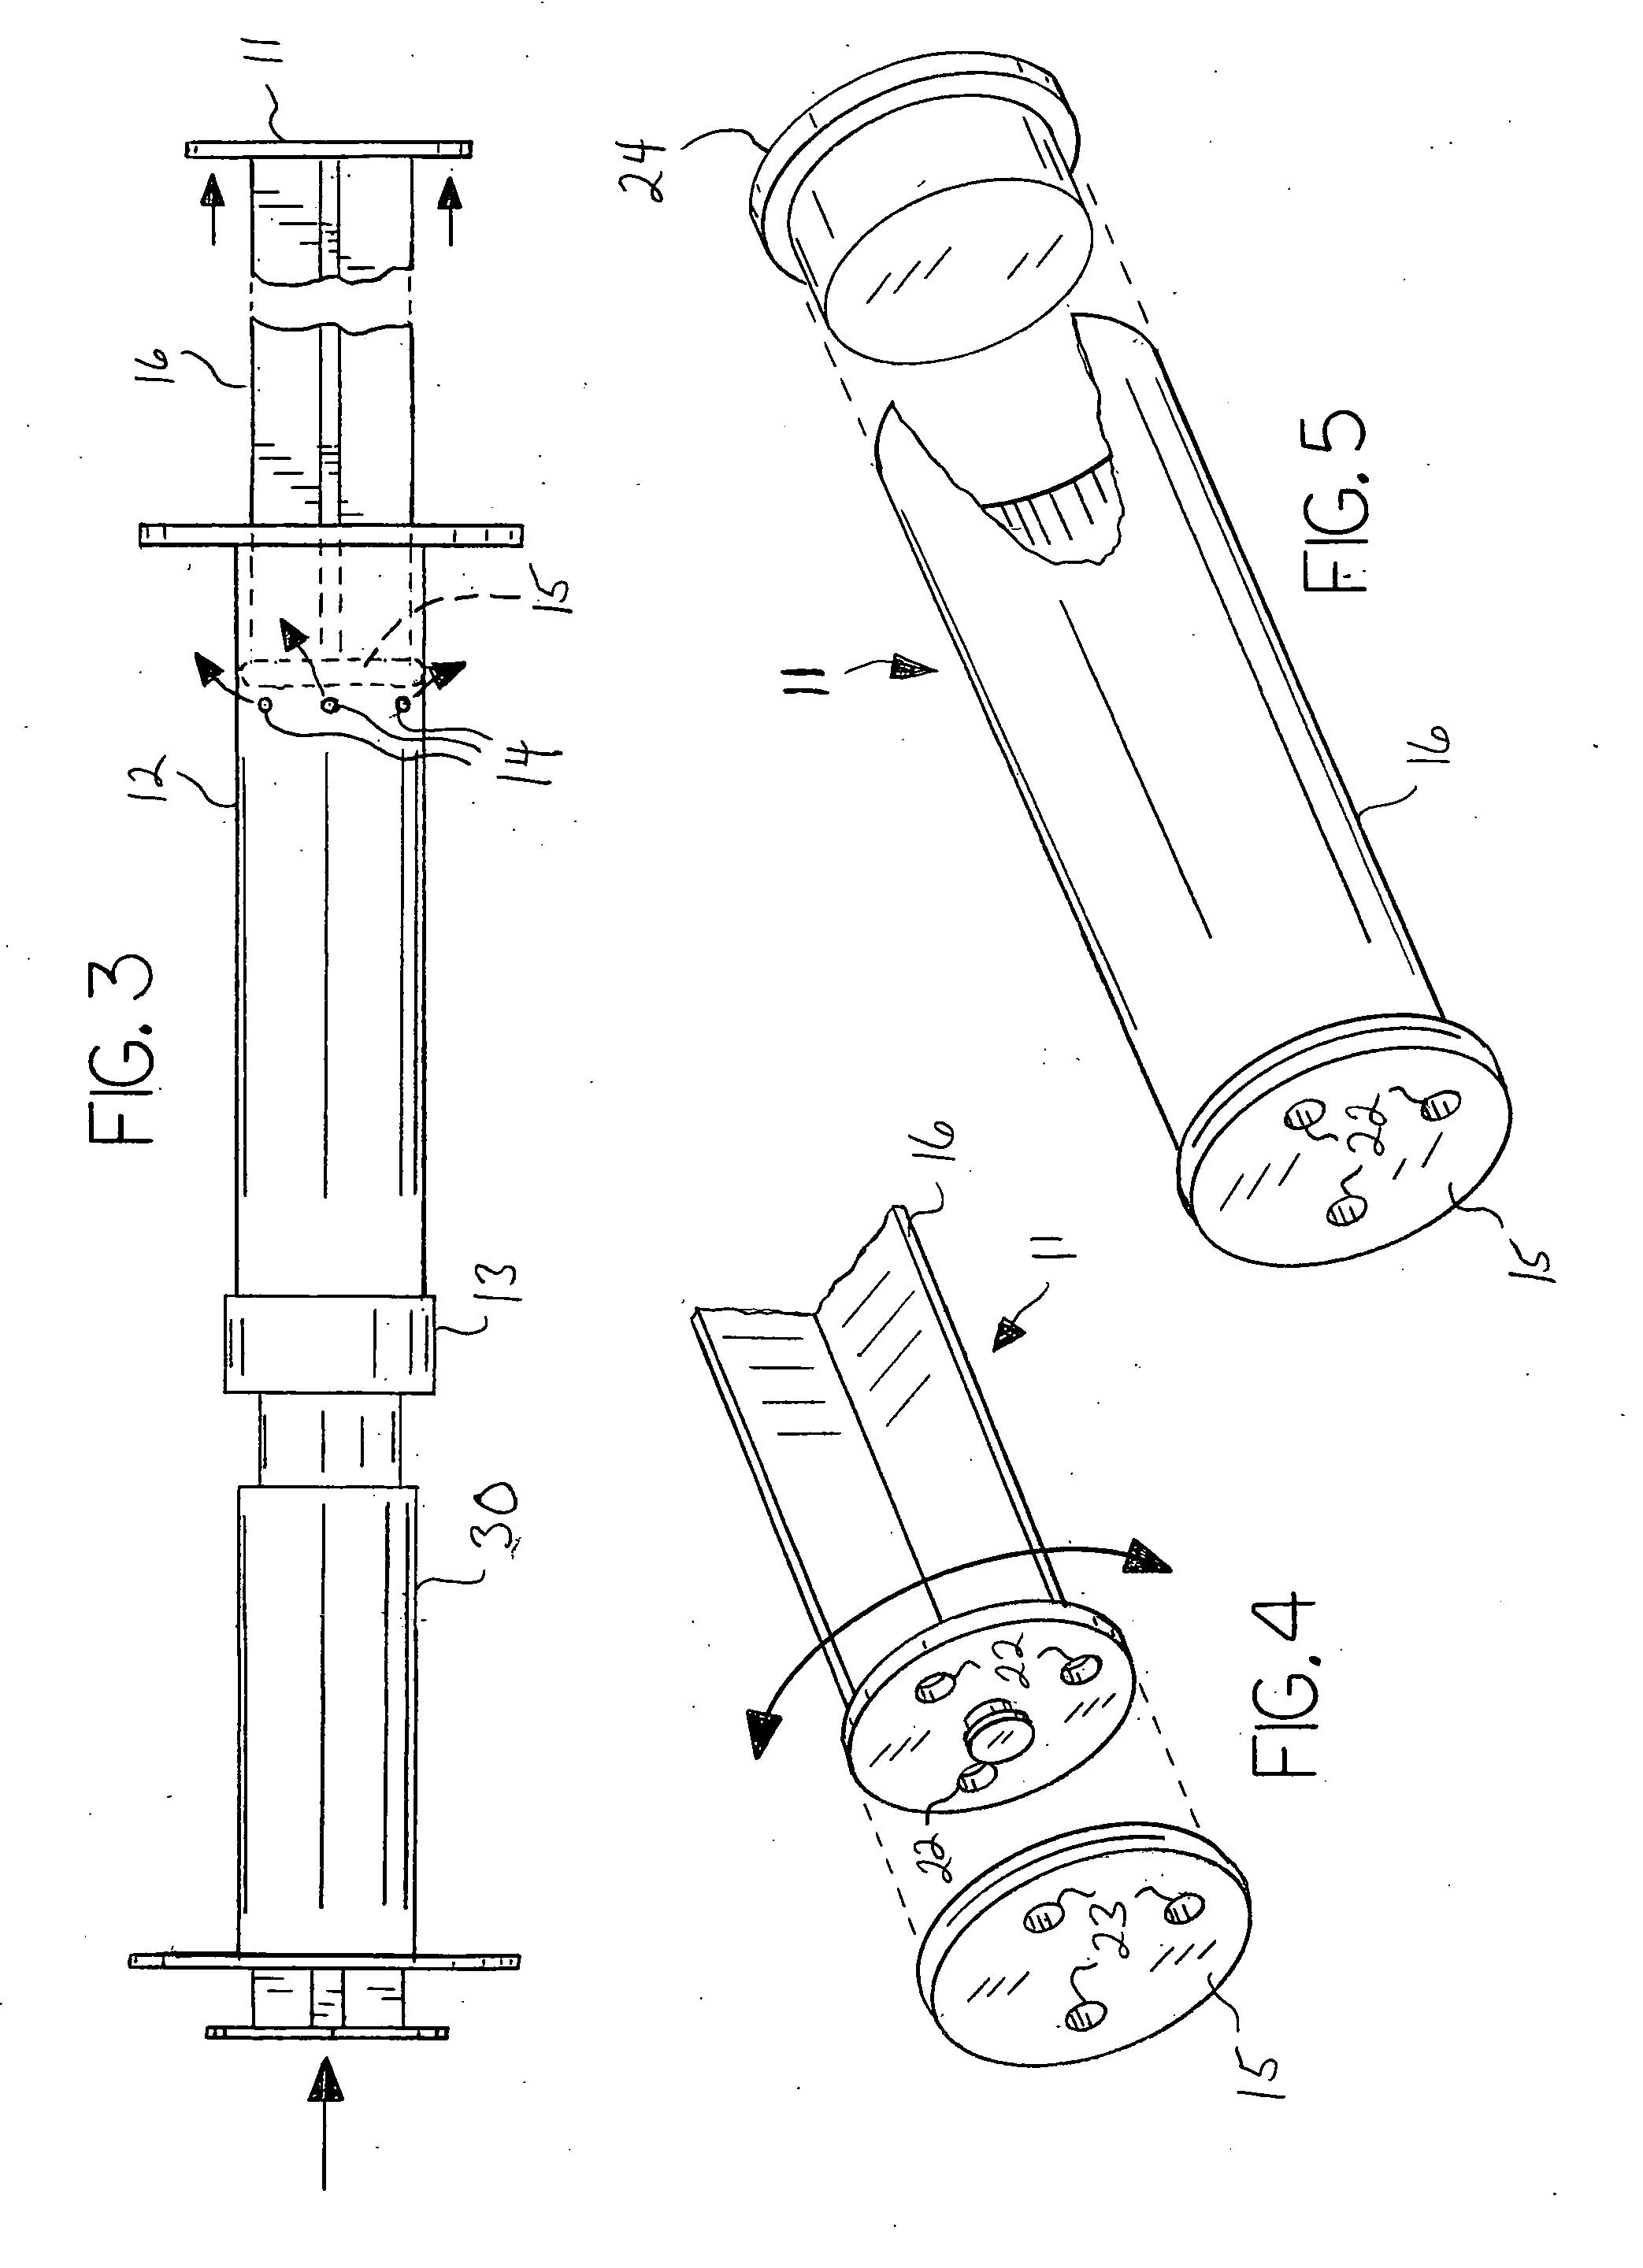 Vented syringe system and method for the containment, mixing and ejection of wetted particulate material